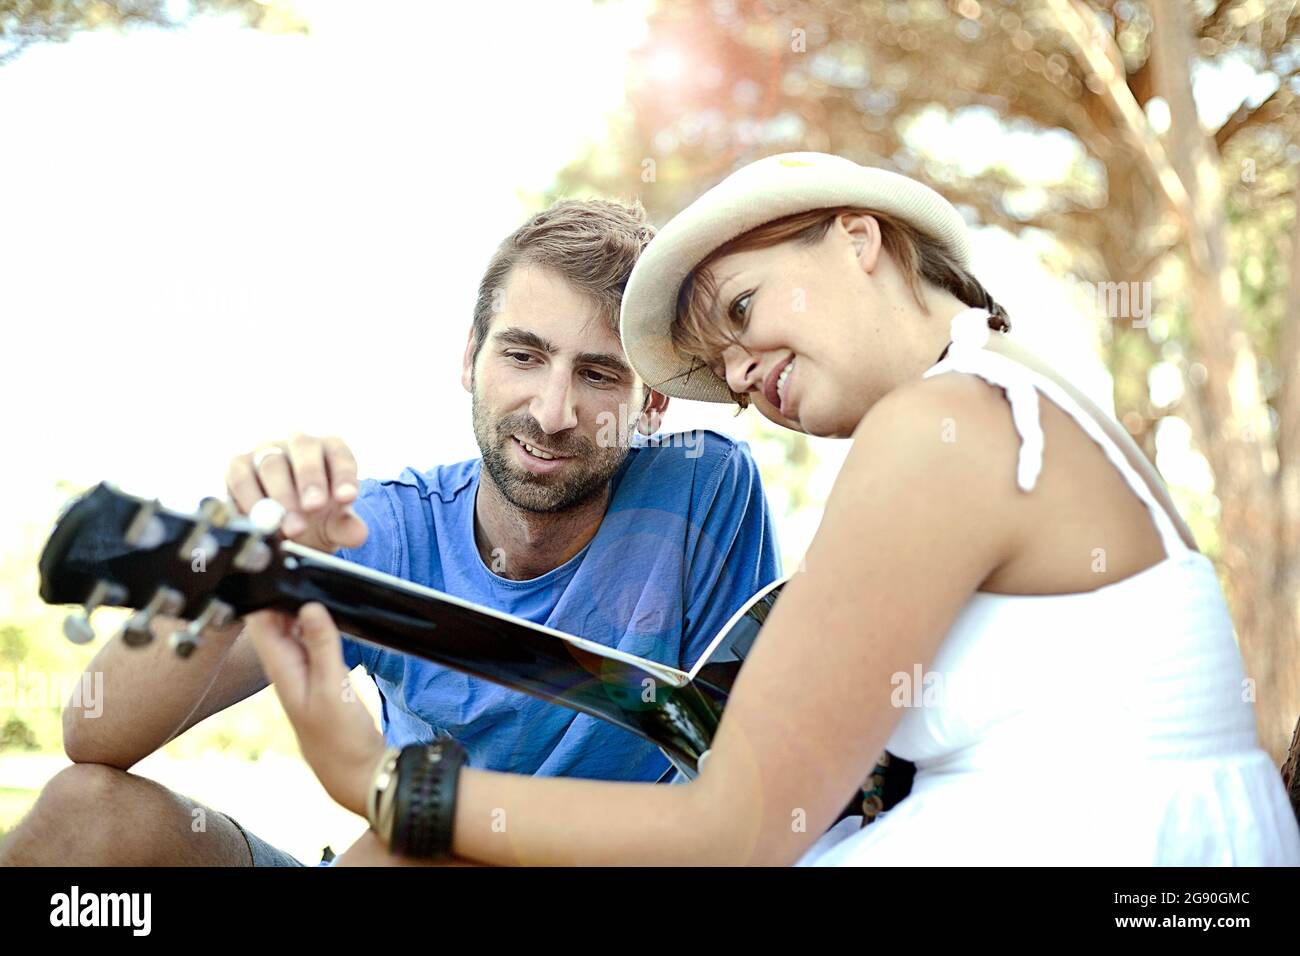 Young man teaching guitar to girlfriend at park Stock Photo